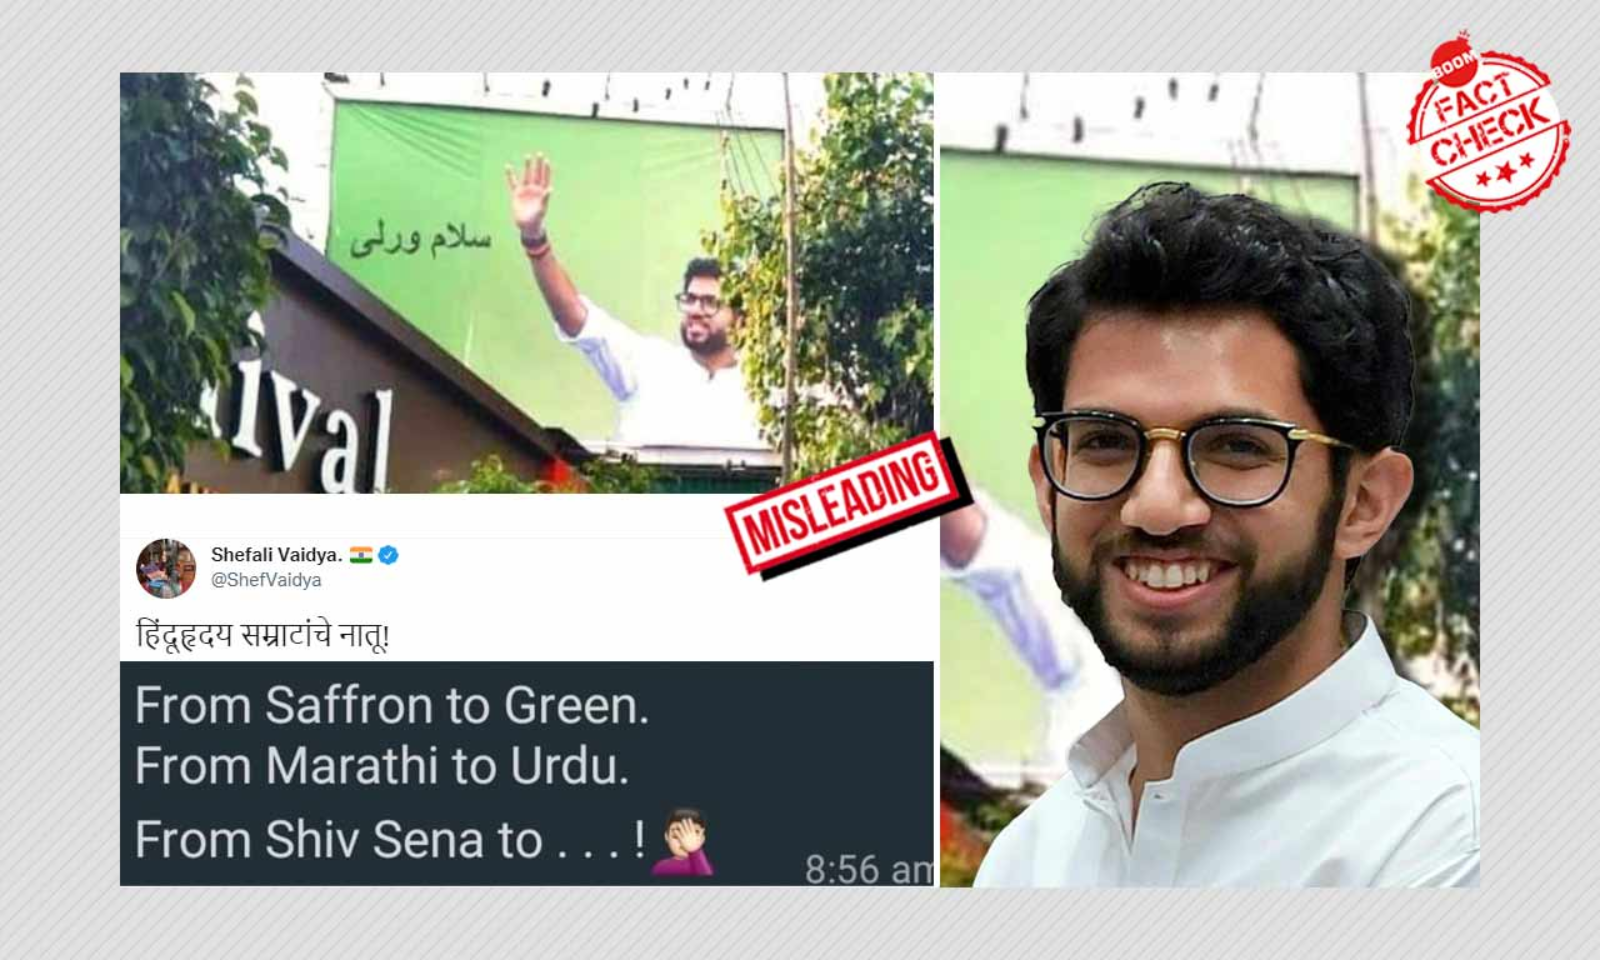 Photo Of ditya Thackeray Poster In Urdu Shared With Misleading Claim Boom